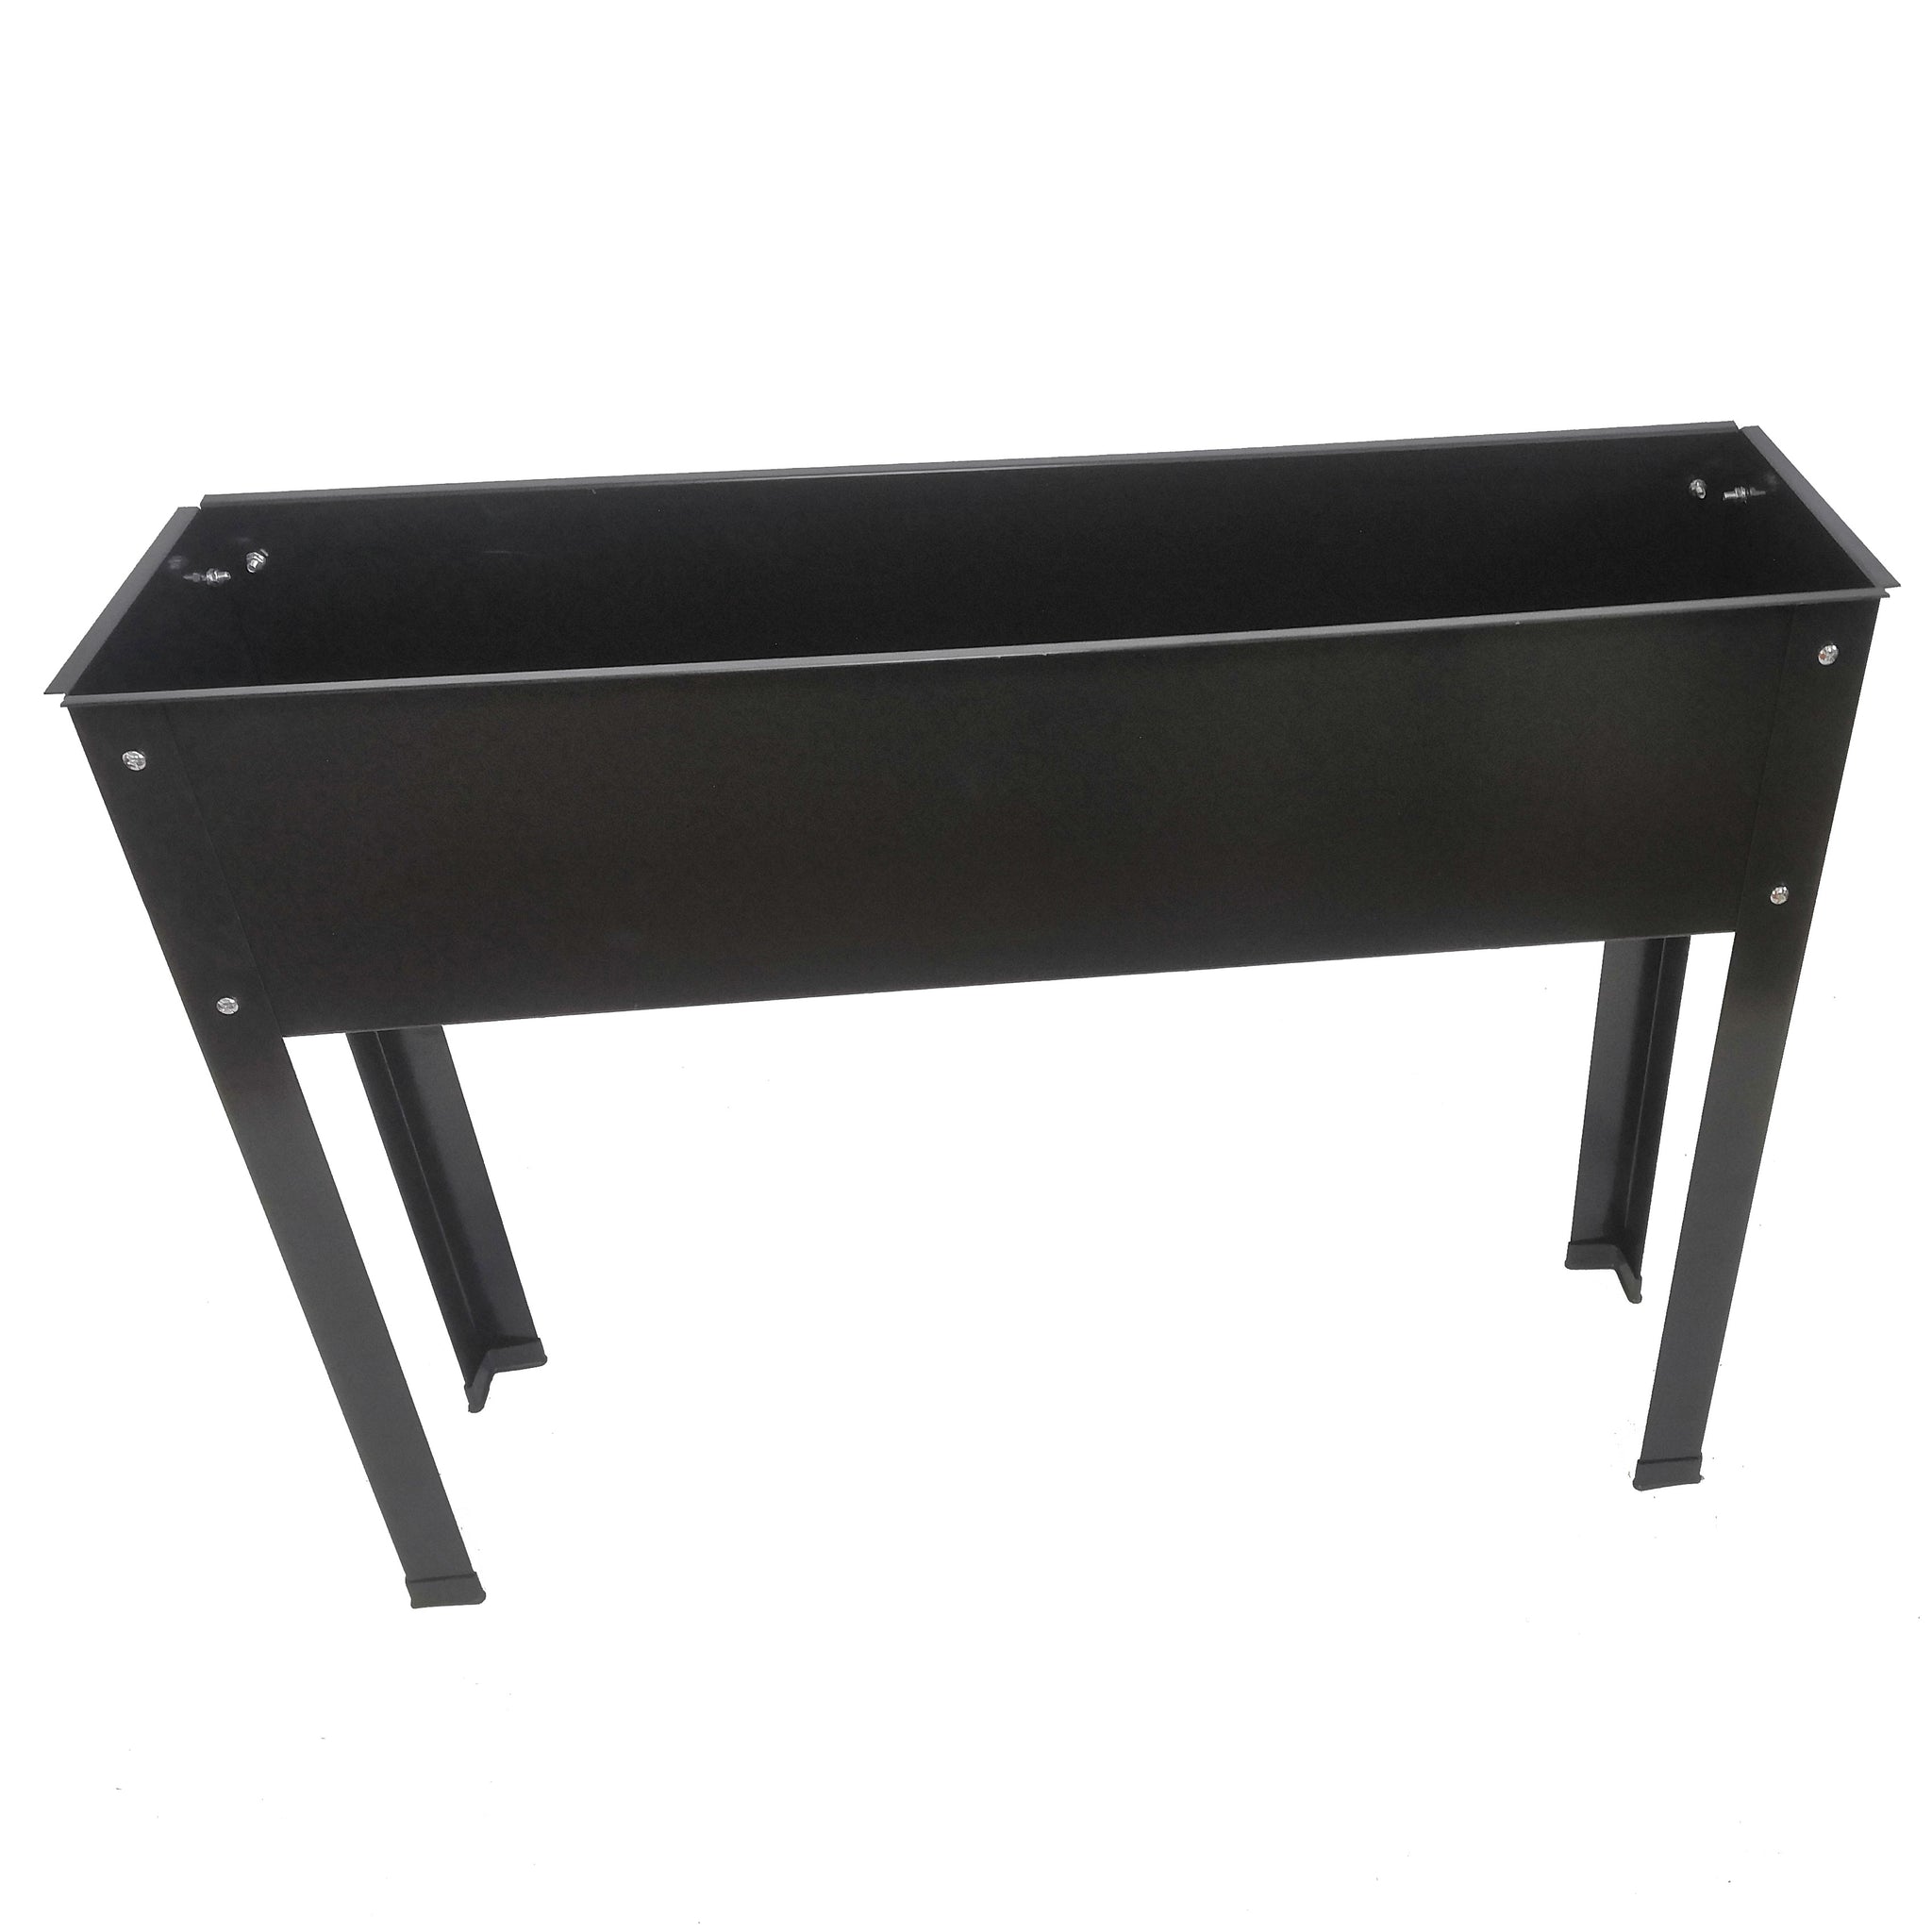 Raised Garden Bed 48x24x32-inch Mobile Elevated Wood Planter w/Lockable Wheels, Storage Shelf, Protective Liner